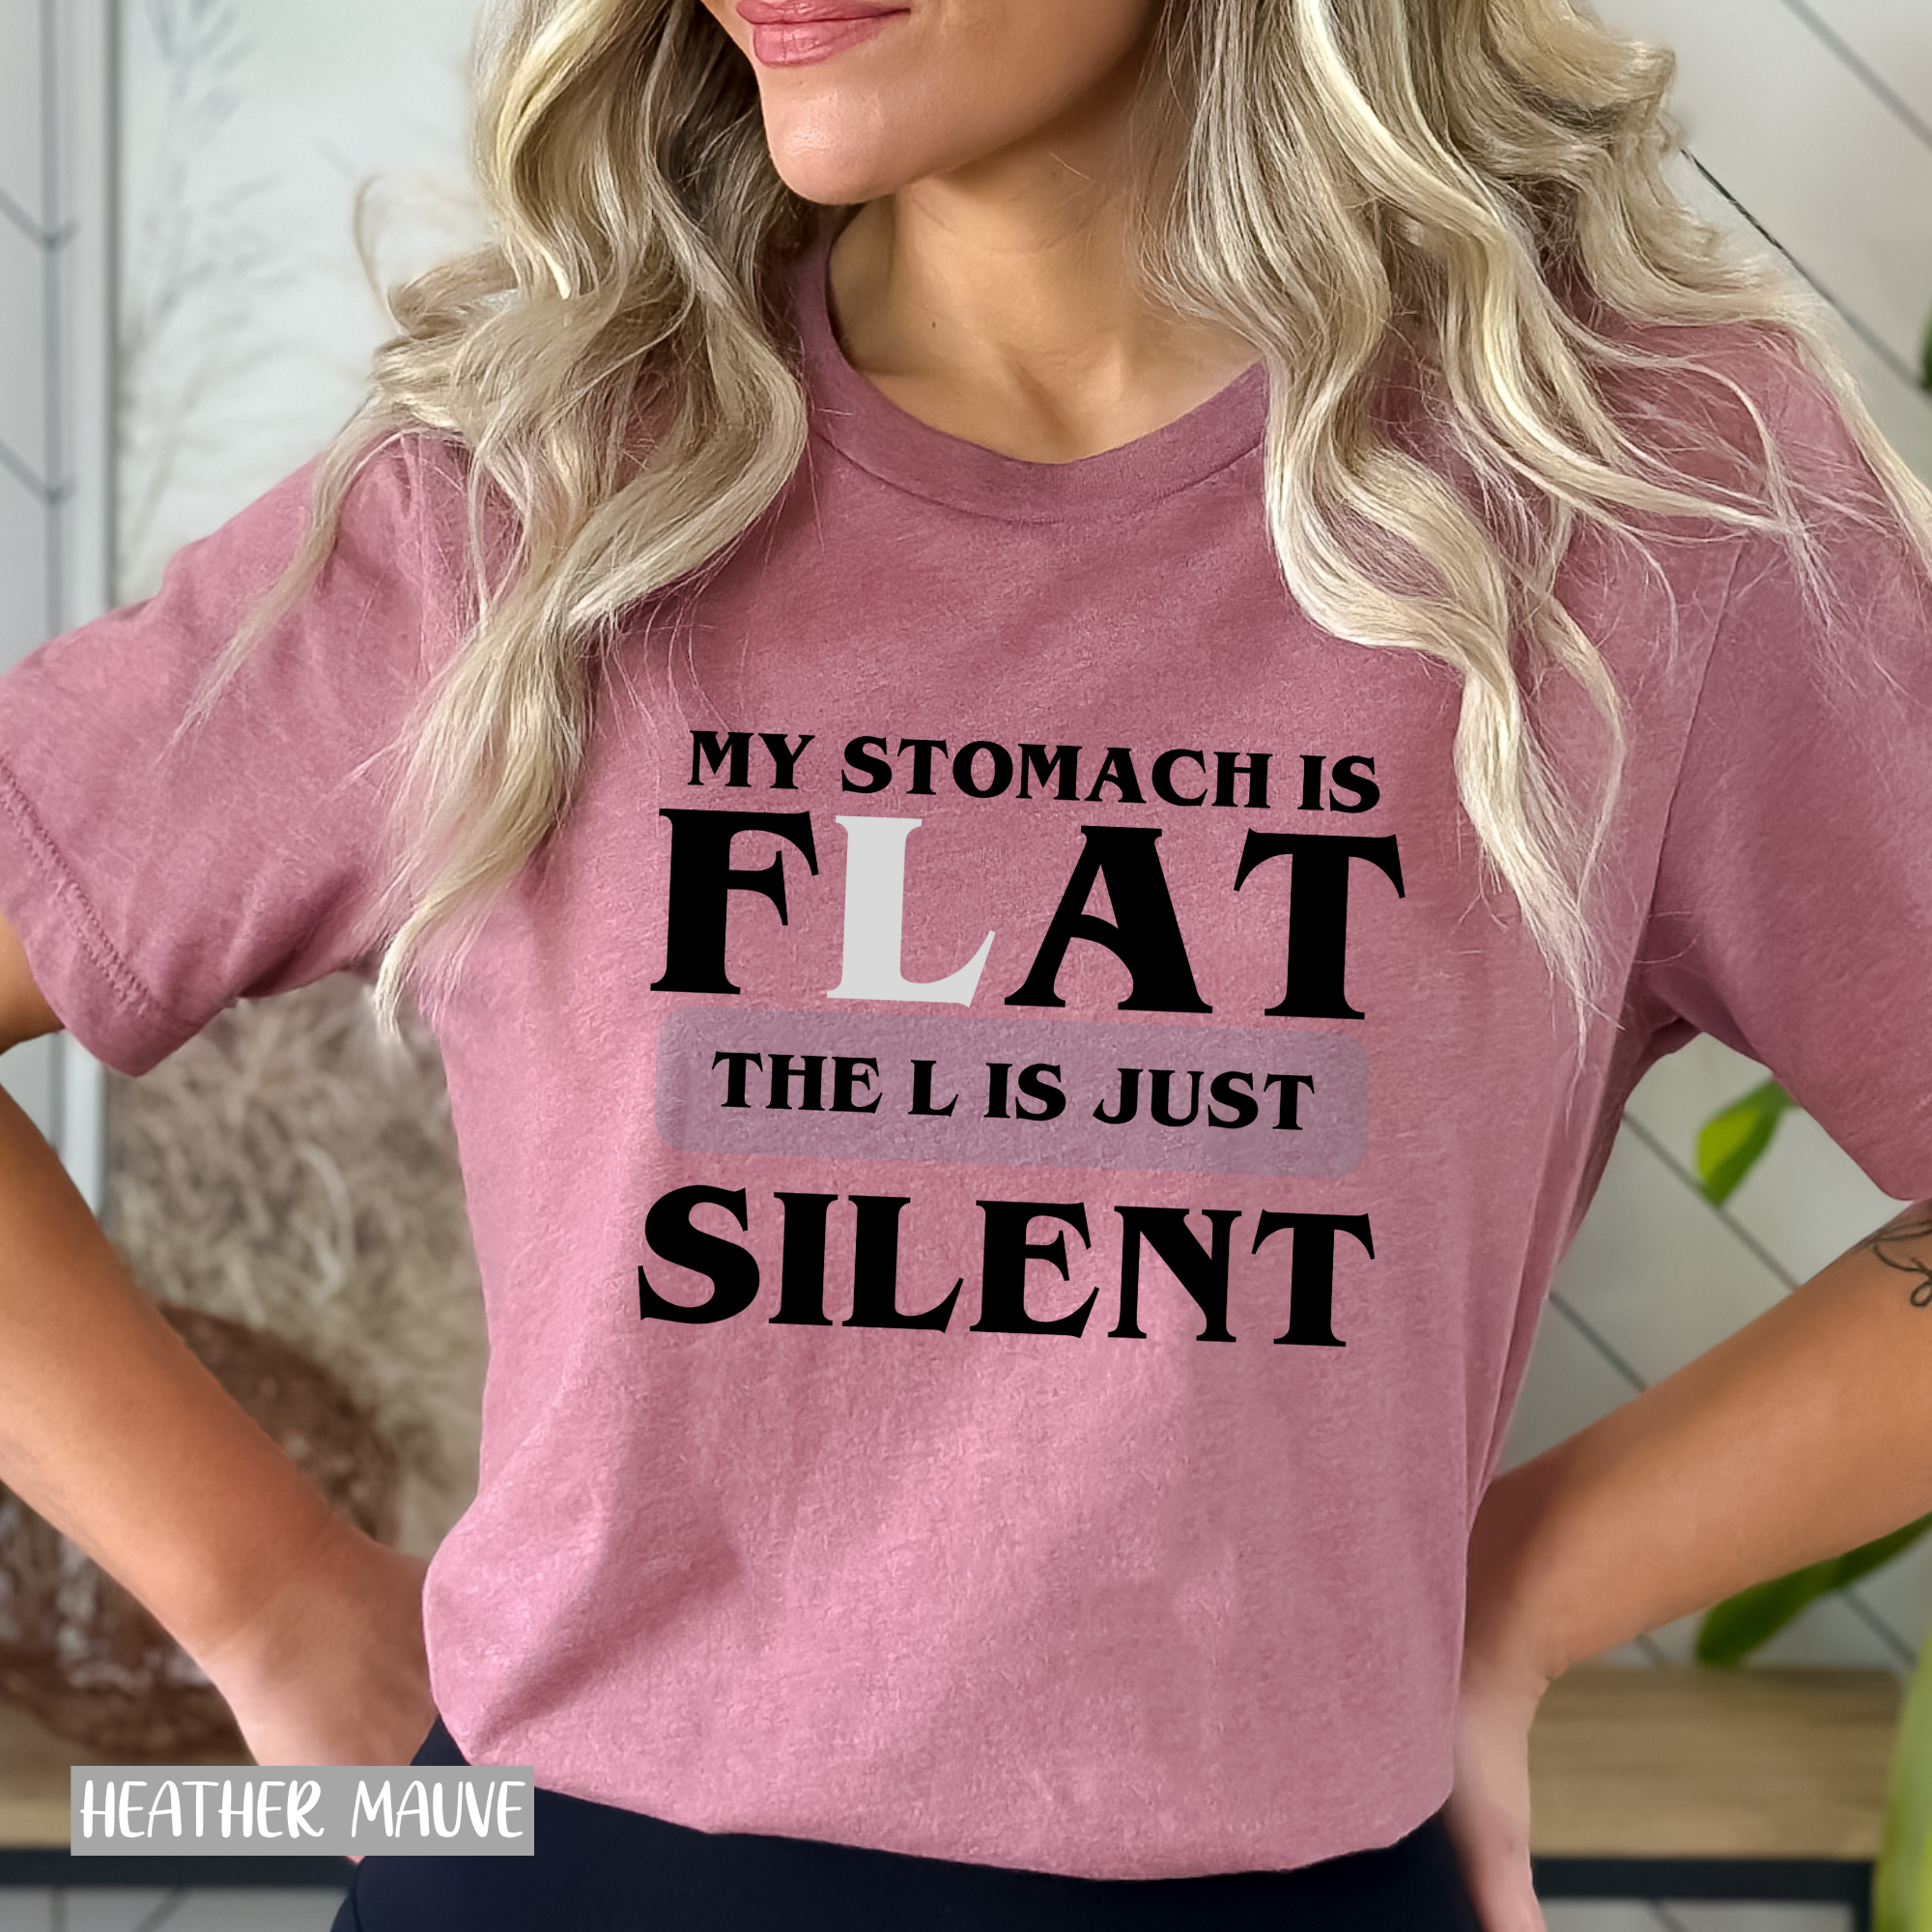 My Stomach Is Flat The L Is Just Silent Shirt - Funny T Shirt Gift